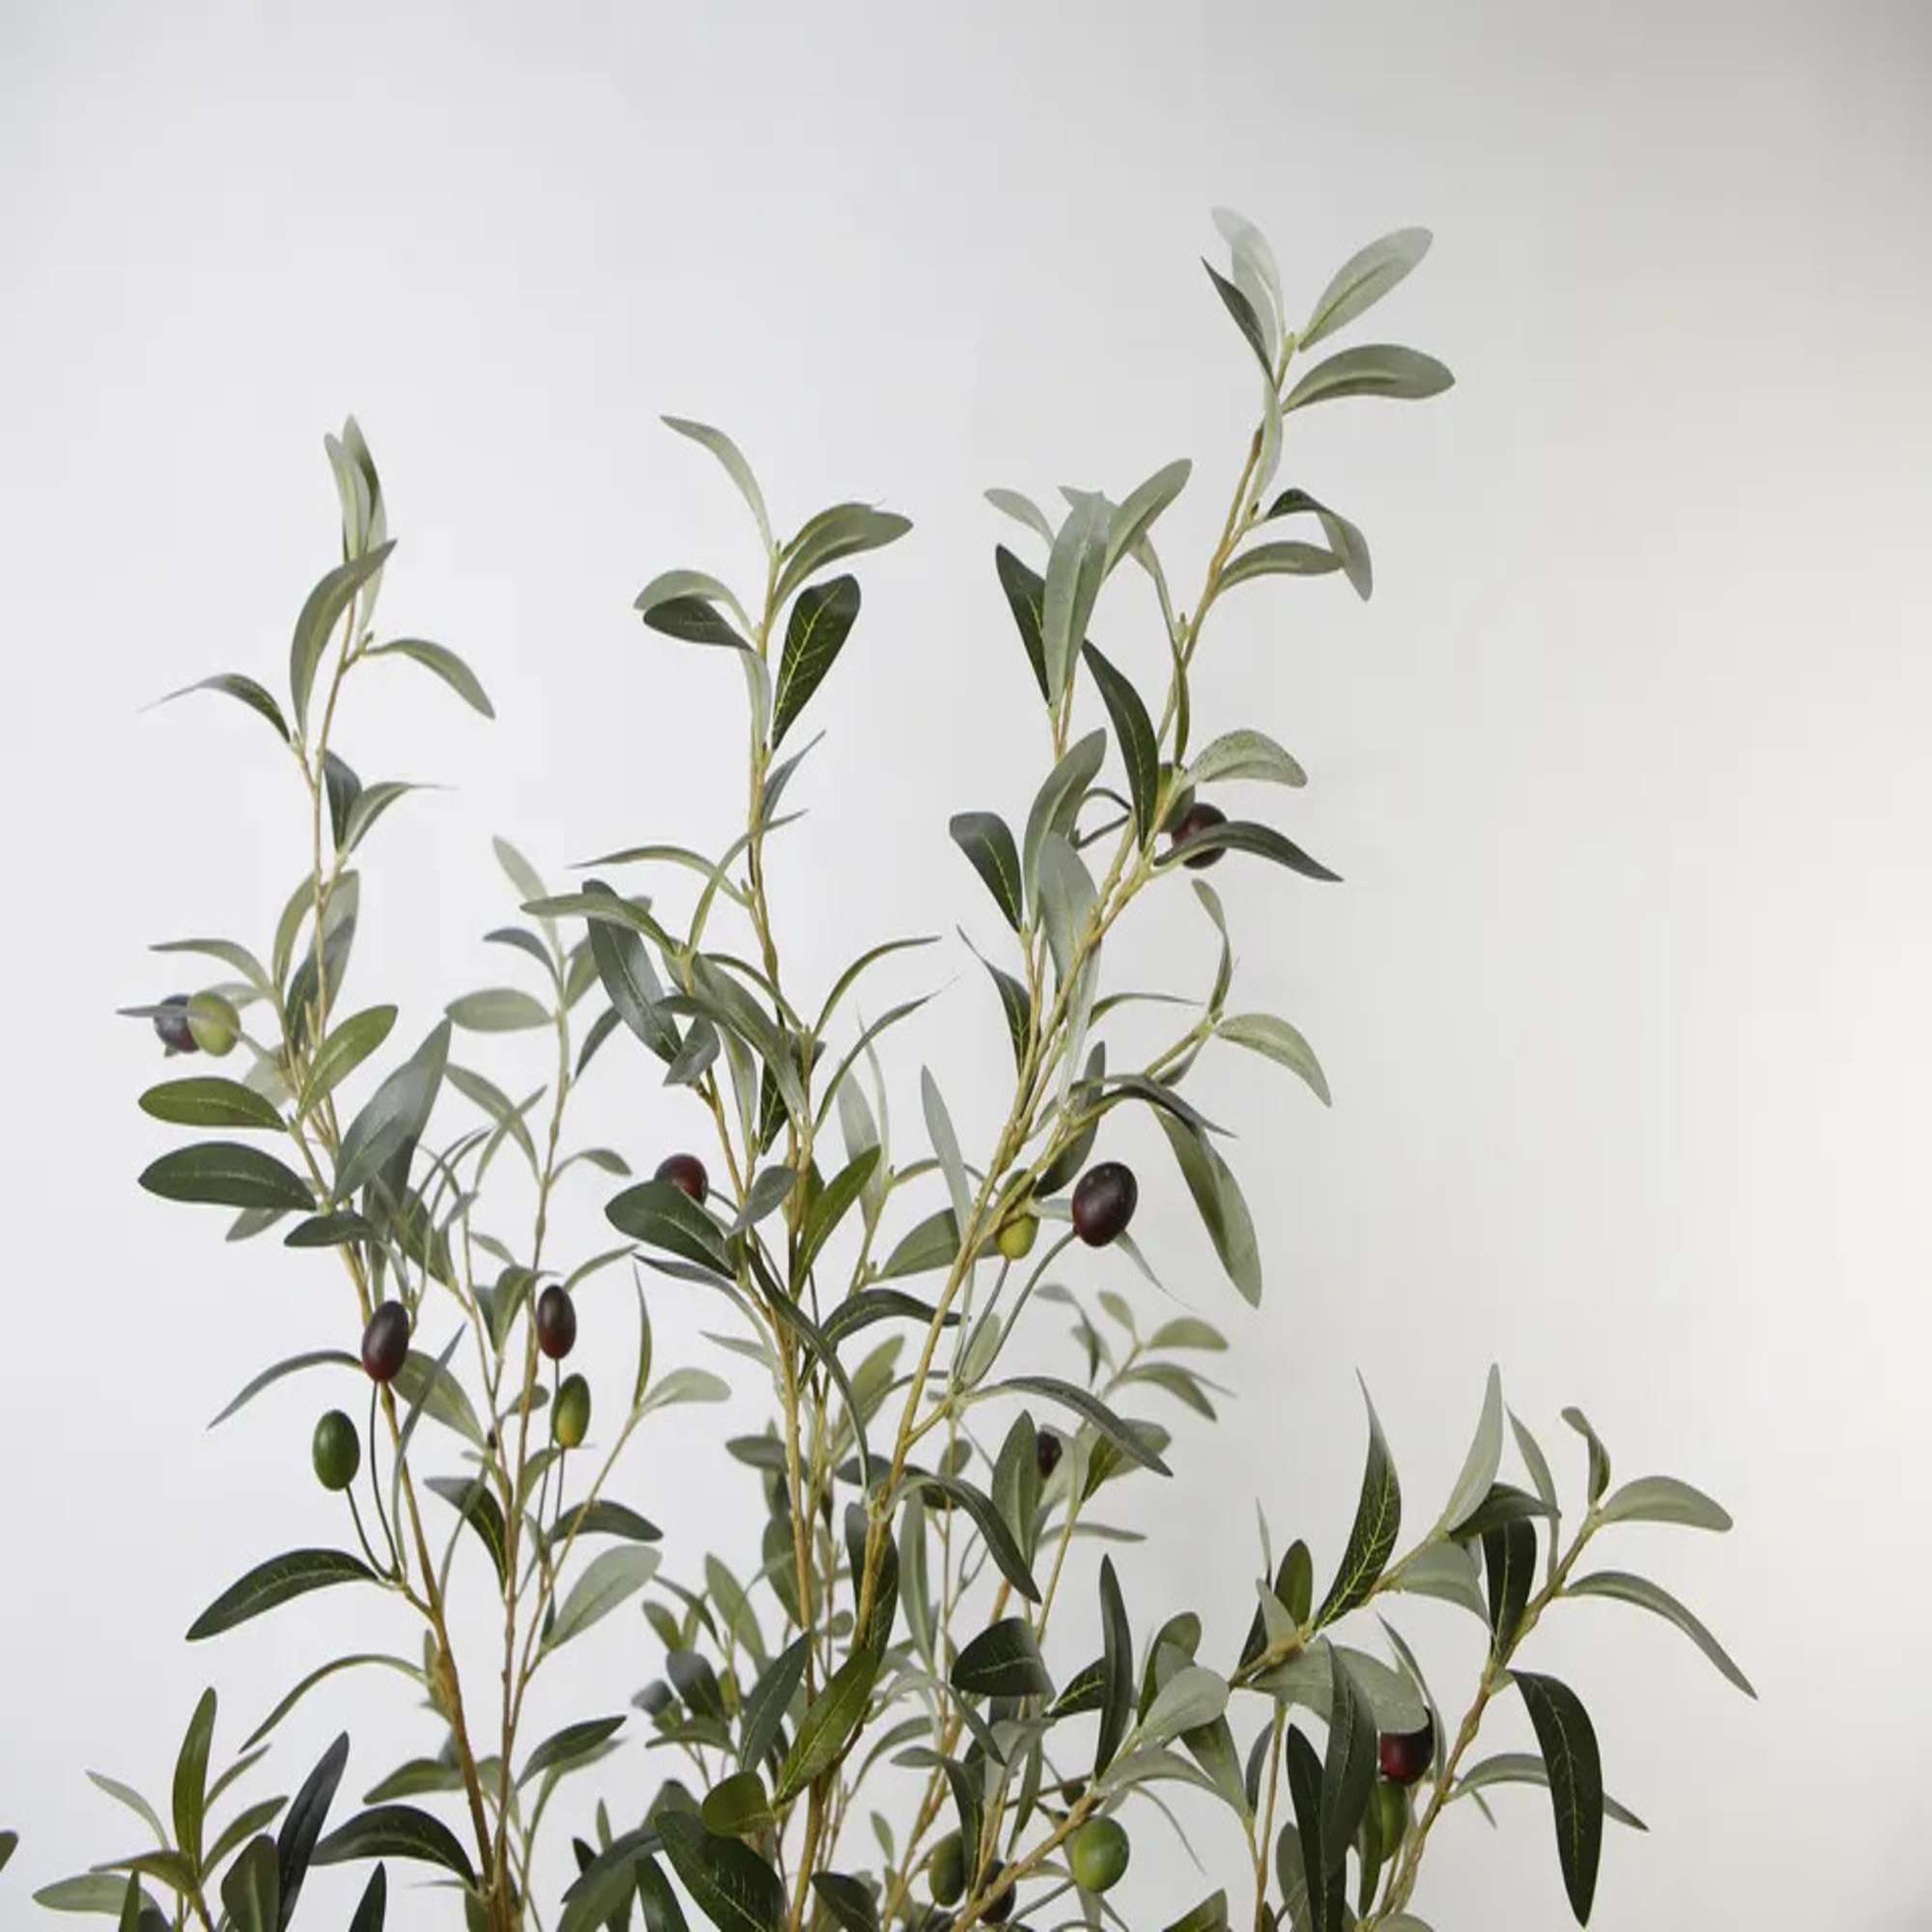 Olive Tree Artificial